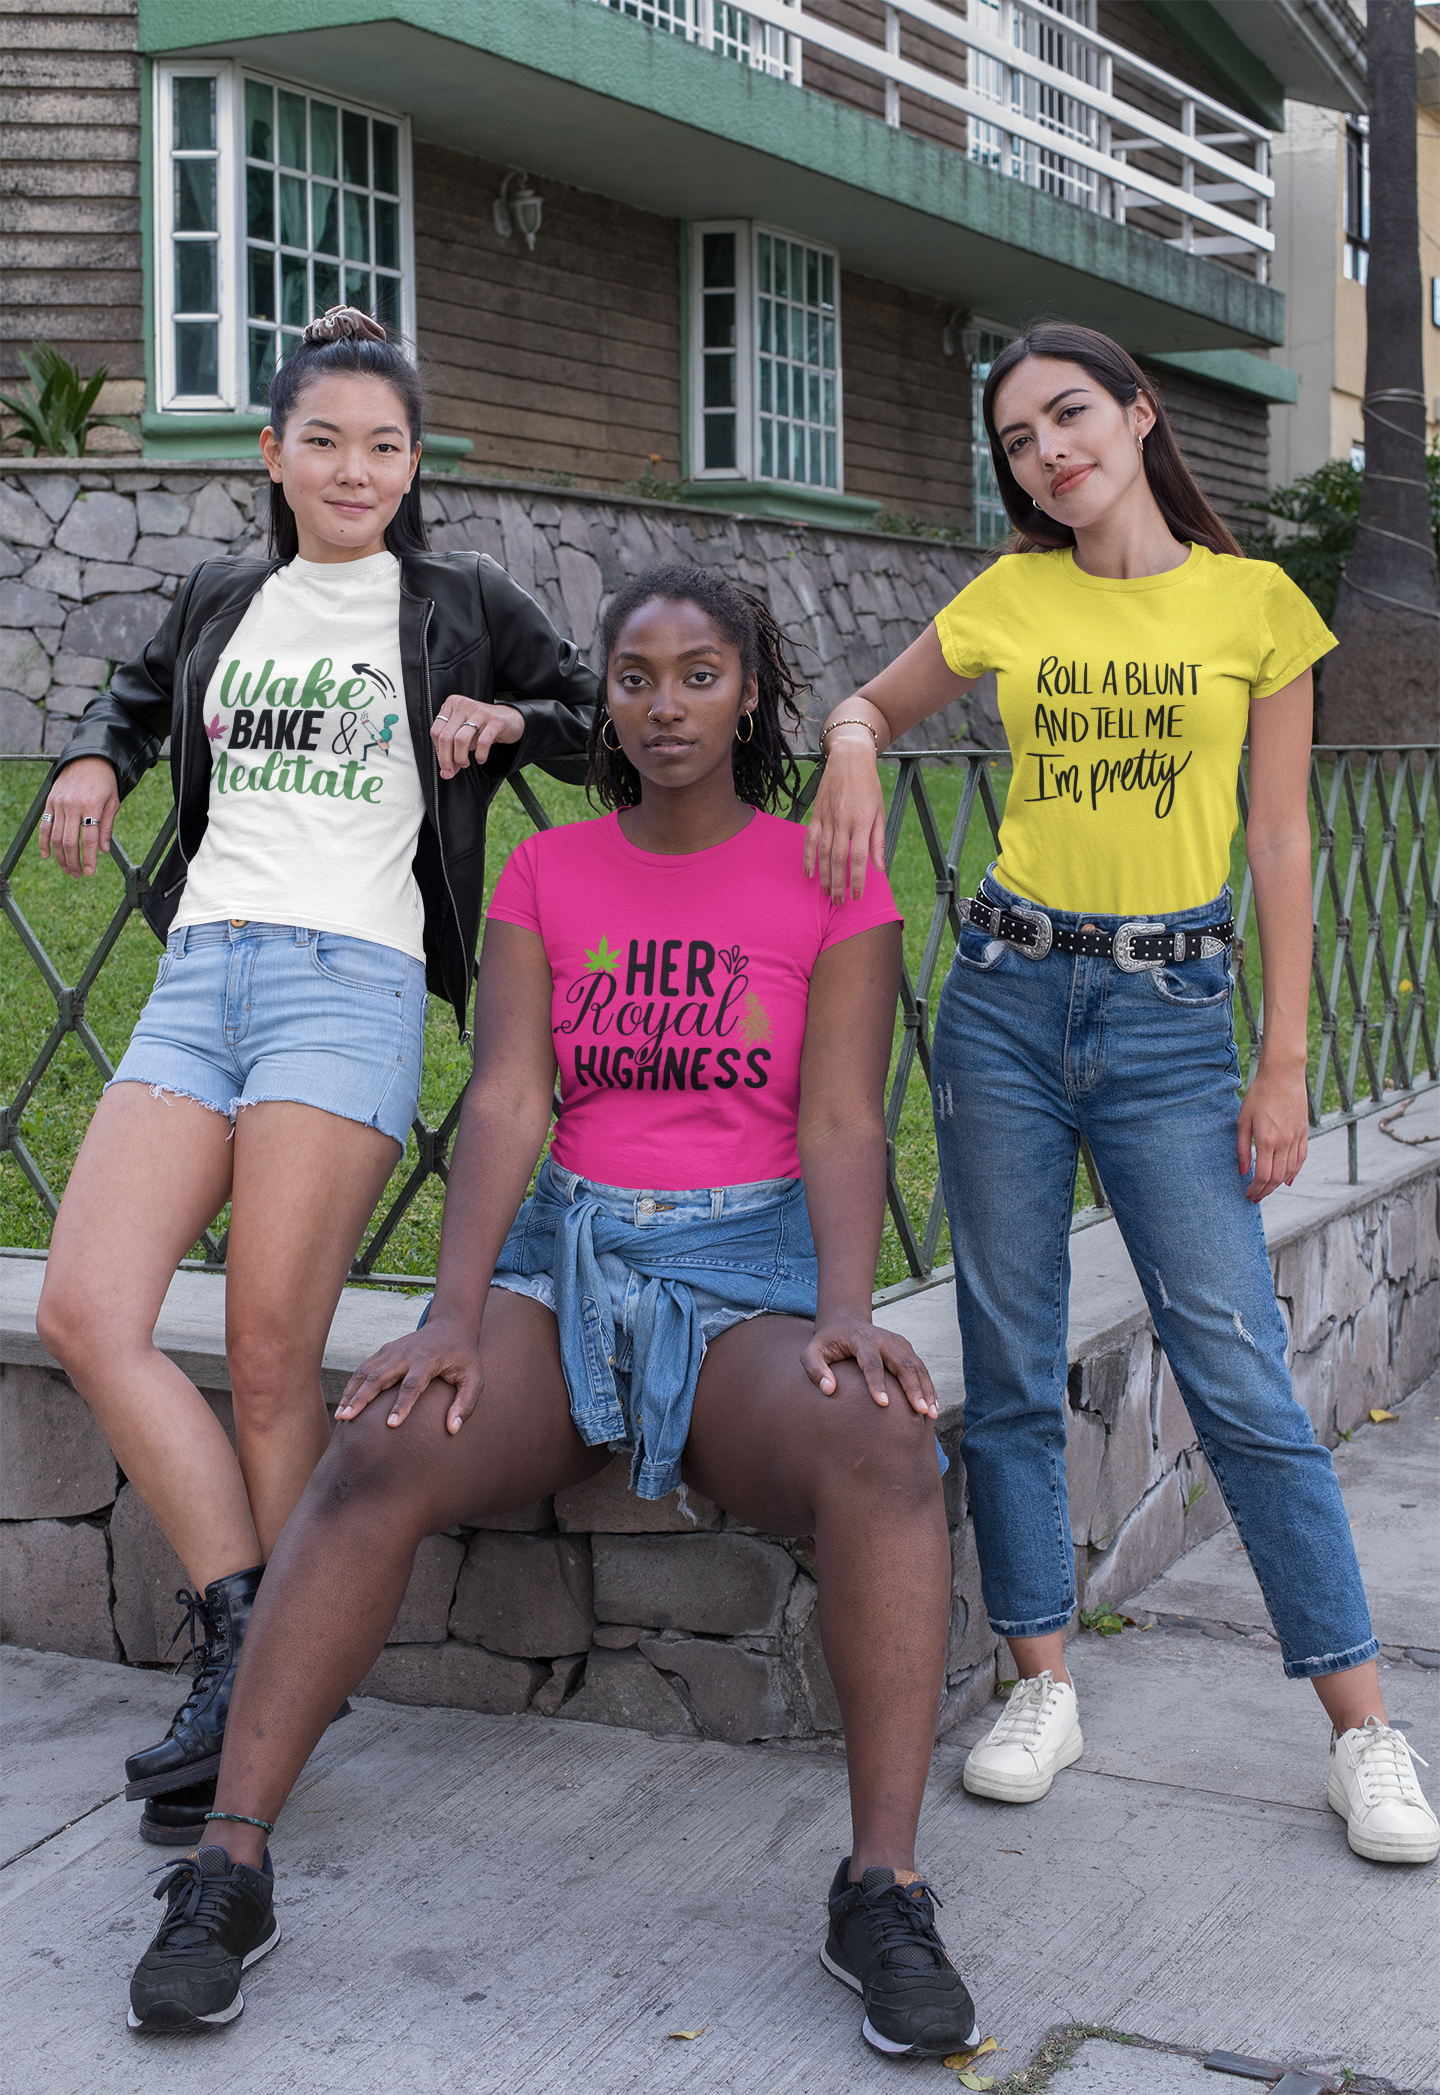 3 women on a corner with an asian woman standing on left with white t-shirt saying "Wake, Bake and Meditate", an black woman sitting in center wearing a hot pink t-shirt saying "Her Royal Highness" and a white woman standing on the right wearing a yellow t-shirt saying "Roll A Blunt and Tell Me I'm Pretty"